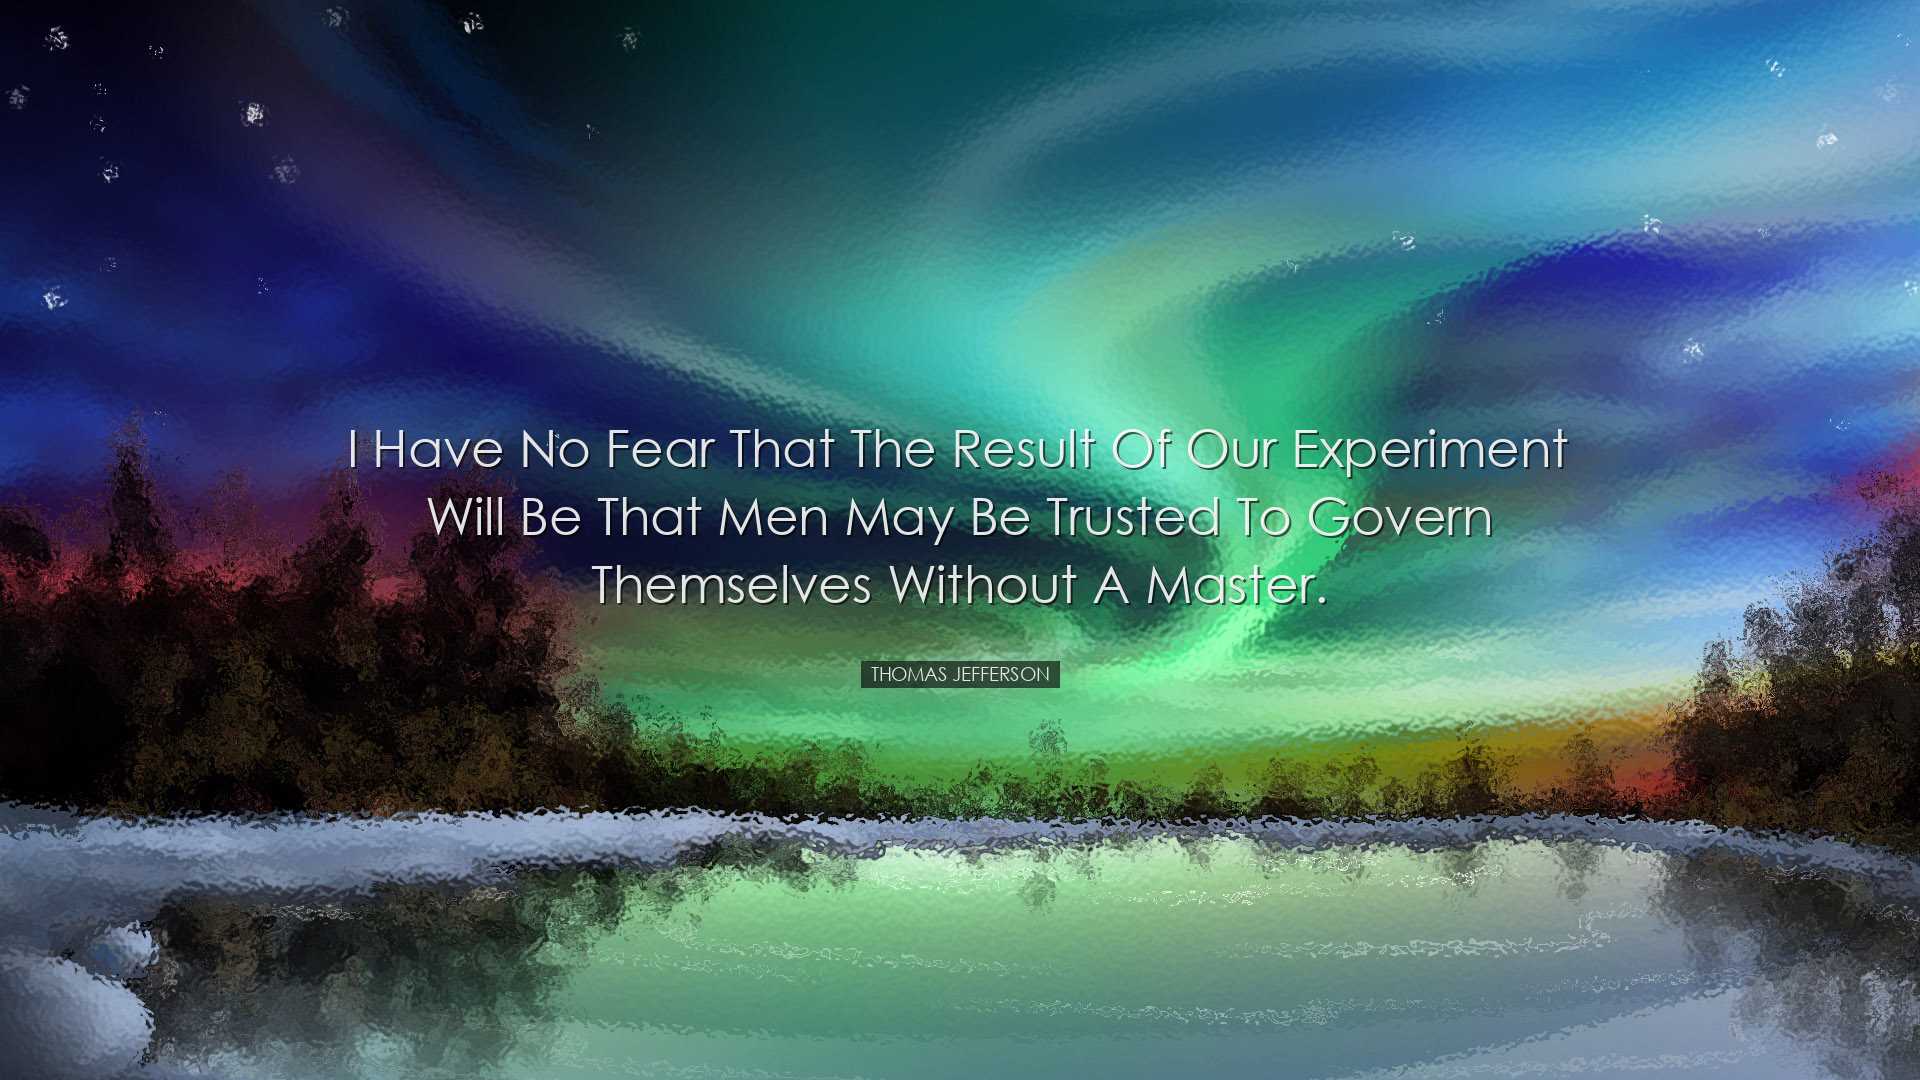 I have no fear that the result of our experiment will be that men